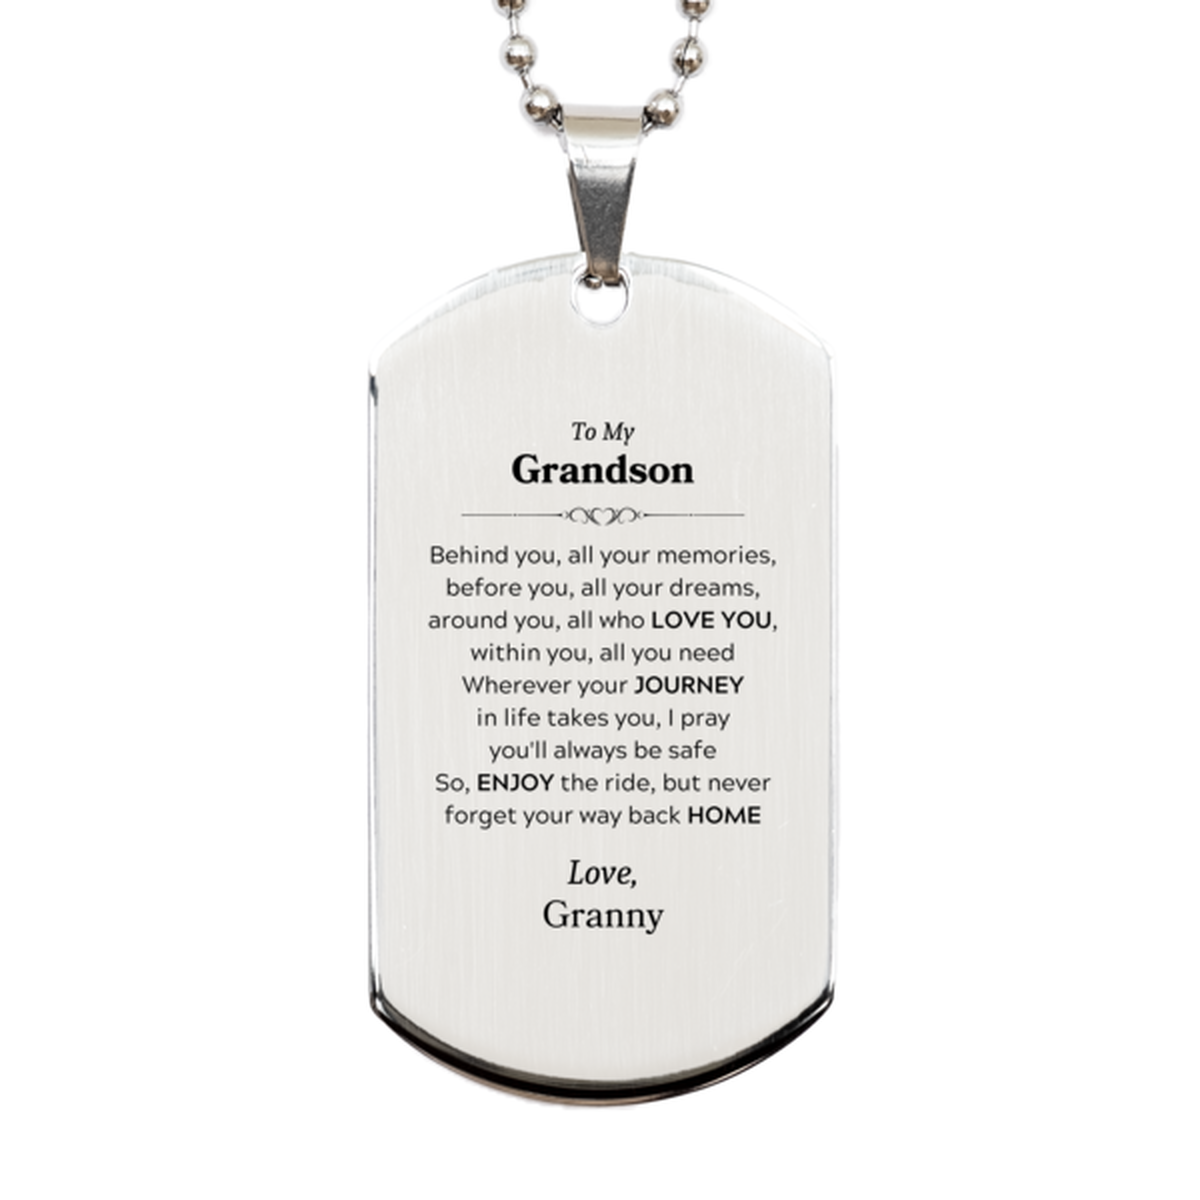 To My Grandson Graduation Gifts from Granny, Grandson Silver Dog Tag Christmas Birthday Gifts for Grandson Behind you, all your memories, before you, all your dreams. Love, Granny